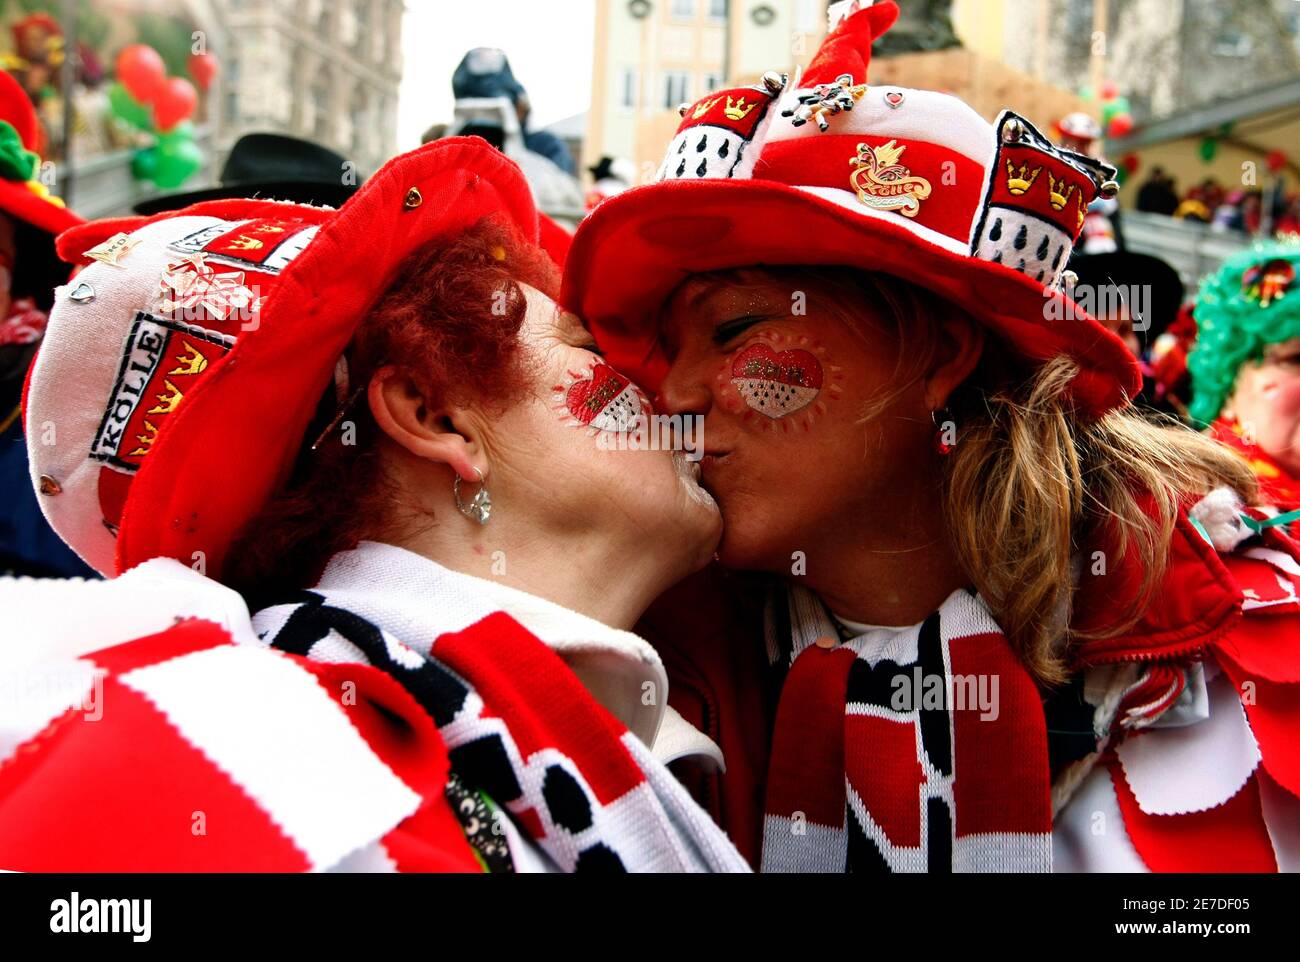 Kiss Mass High Resolution Stock Photography and Images - Alamy